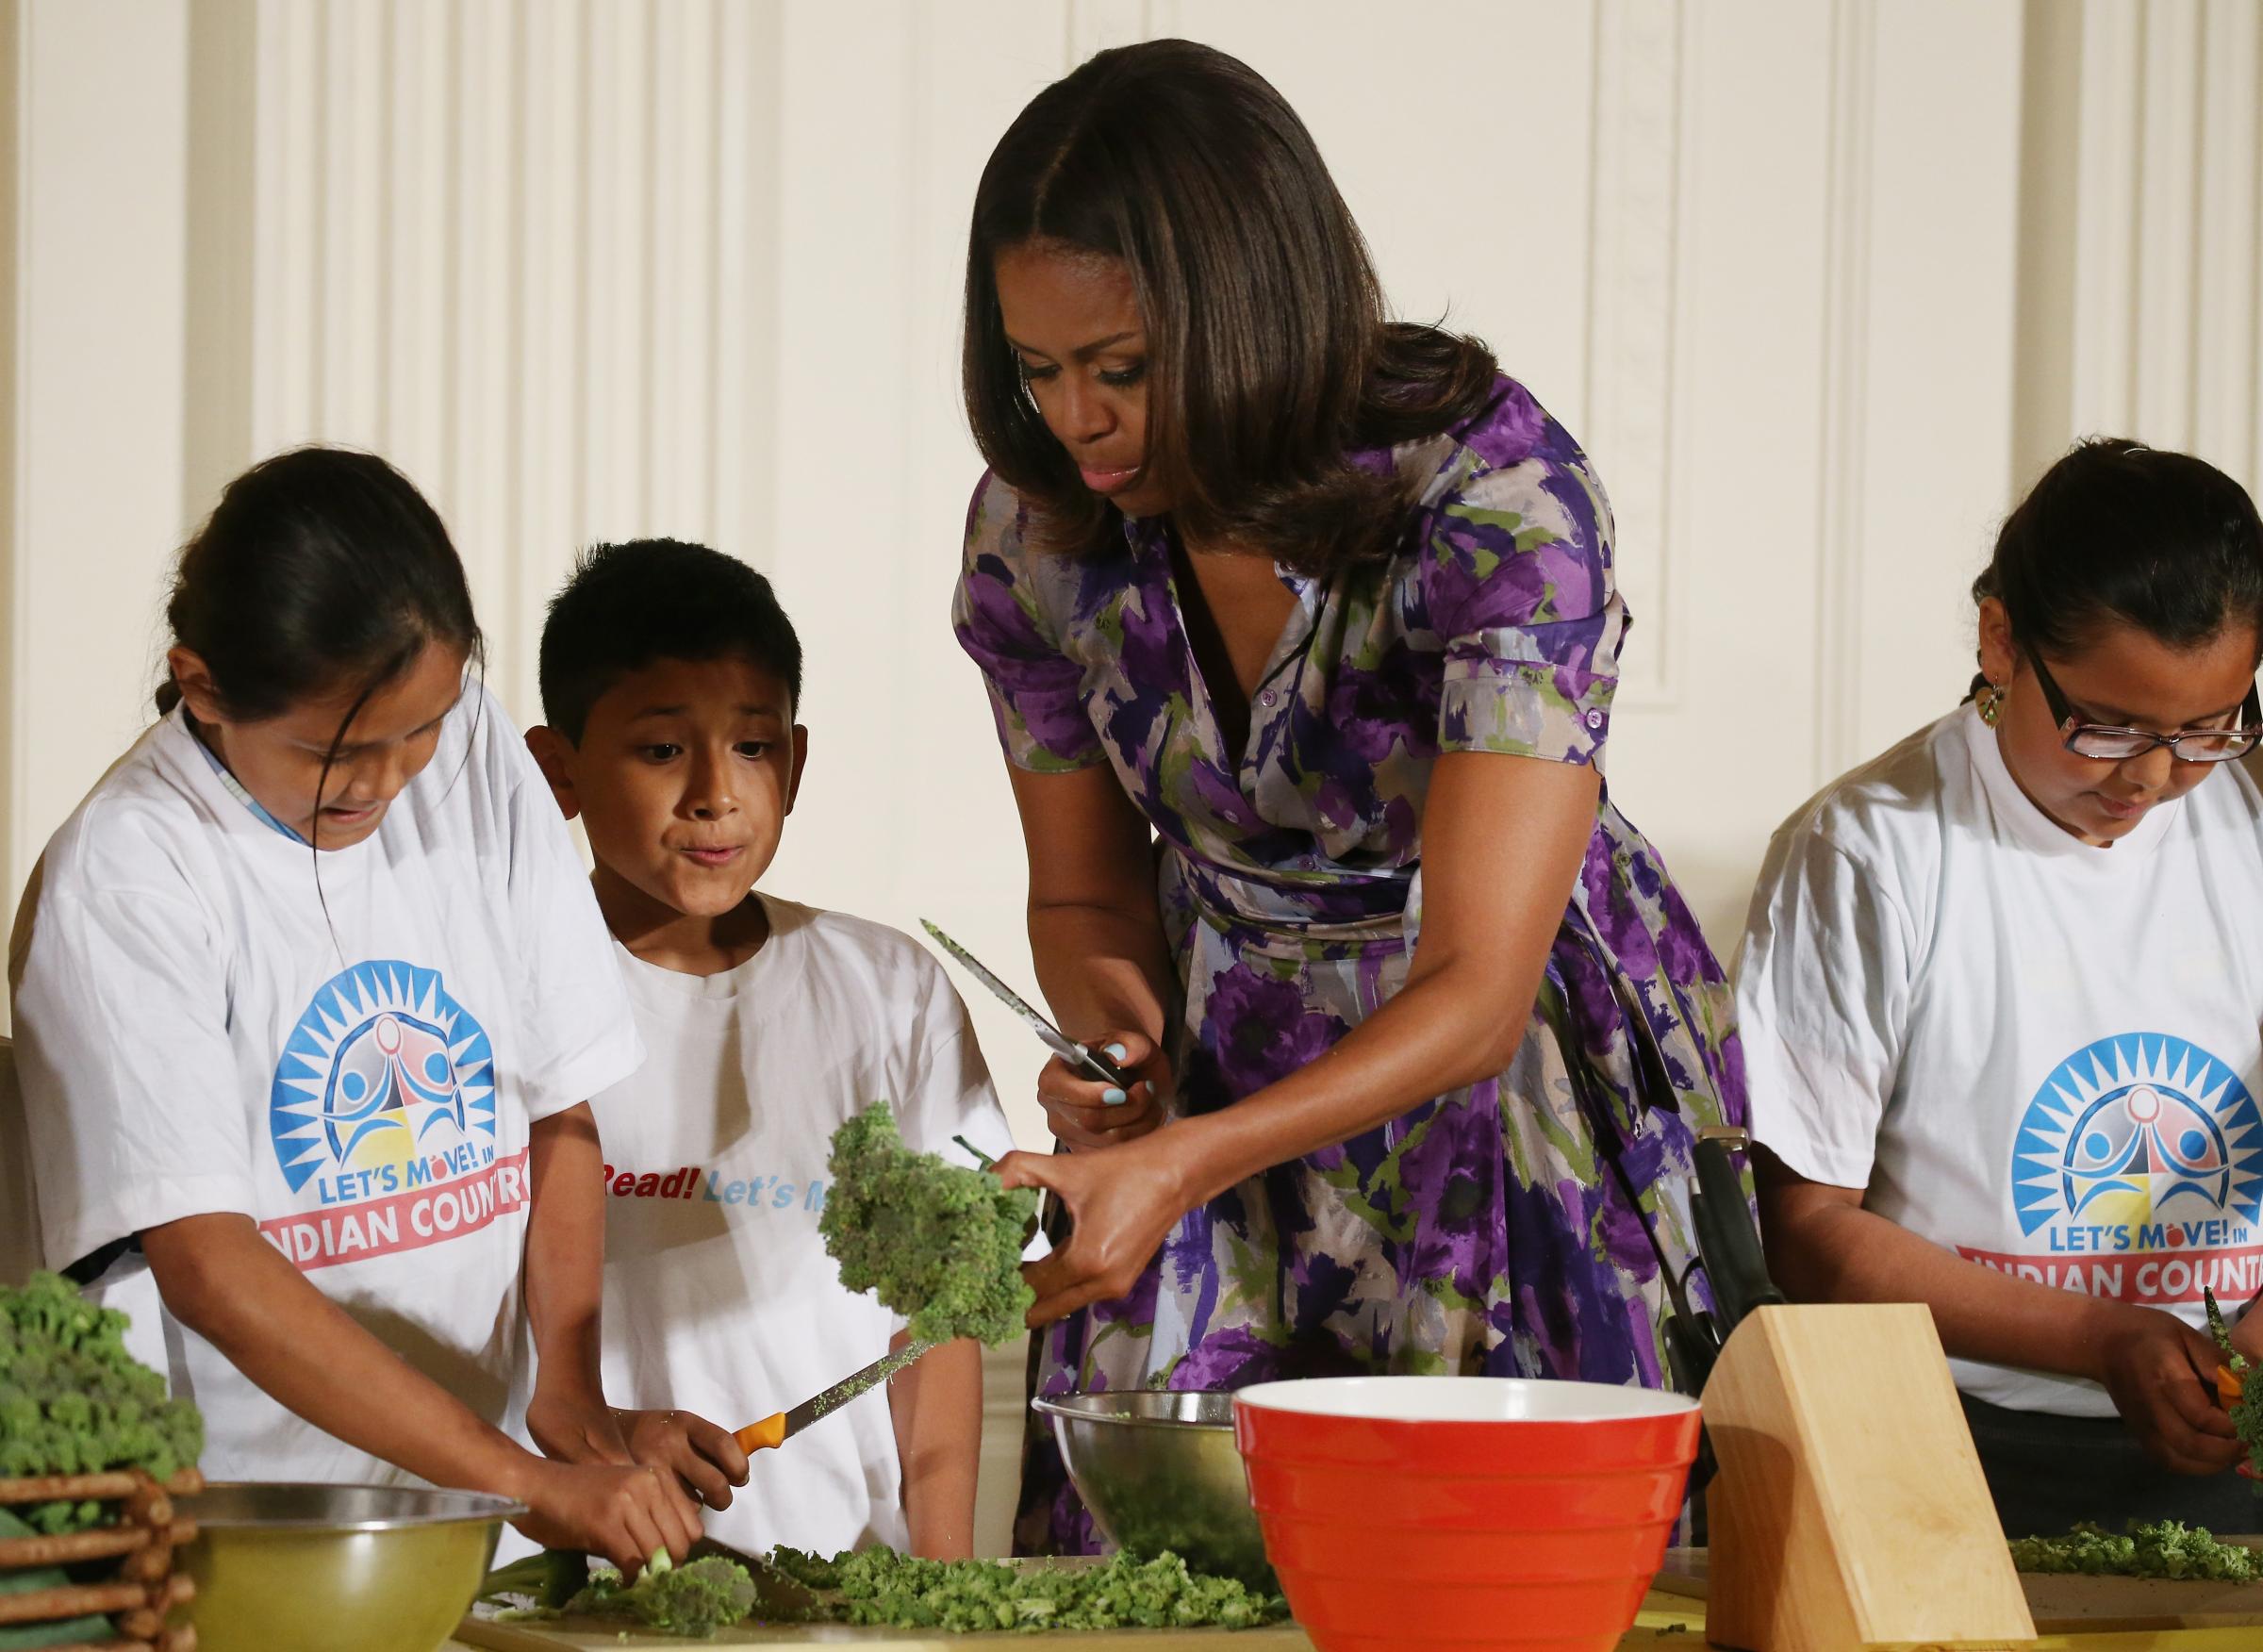 WASHINGTON, DC - JUNE 03: First lady Michelle Obama is joined by local students in preparing vegetables that were recently harvested from the White House garden, in the East Room at the White House June 3, 2015 in Washington, DC. The first lady and local students enjoyed eating the vegetables they planted in the garden on the South Lawn to initiate a national conversation around the health and well-being. (Photo by Mark Wilson/Getty Images)